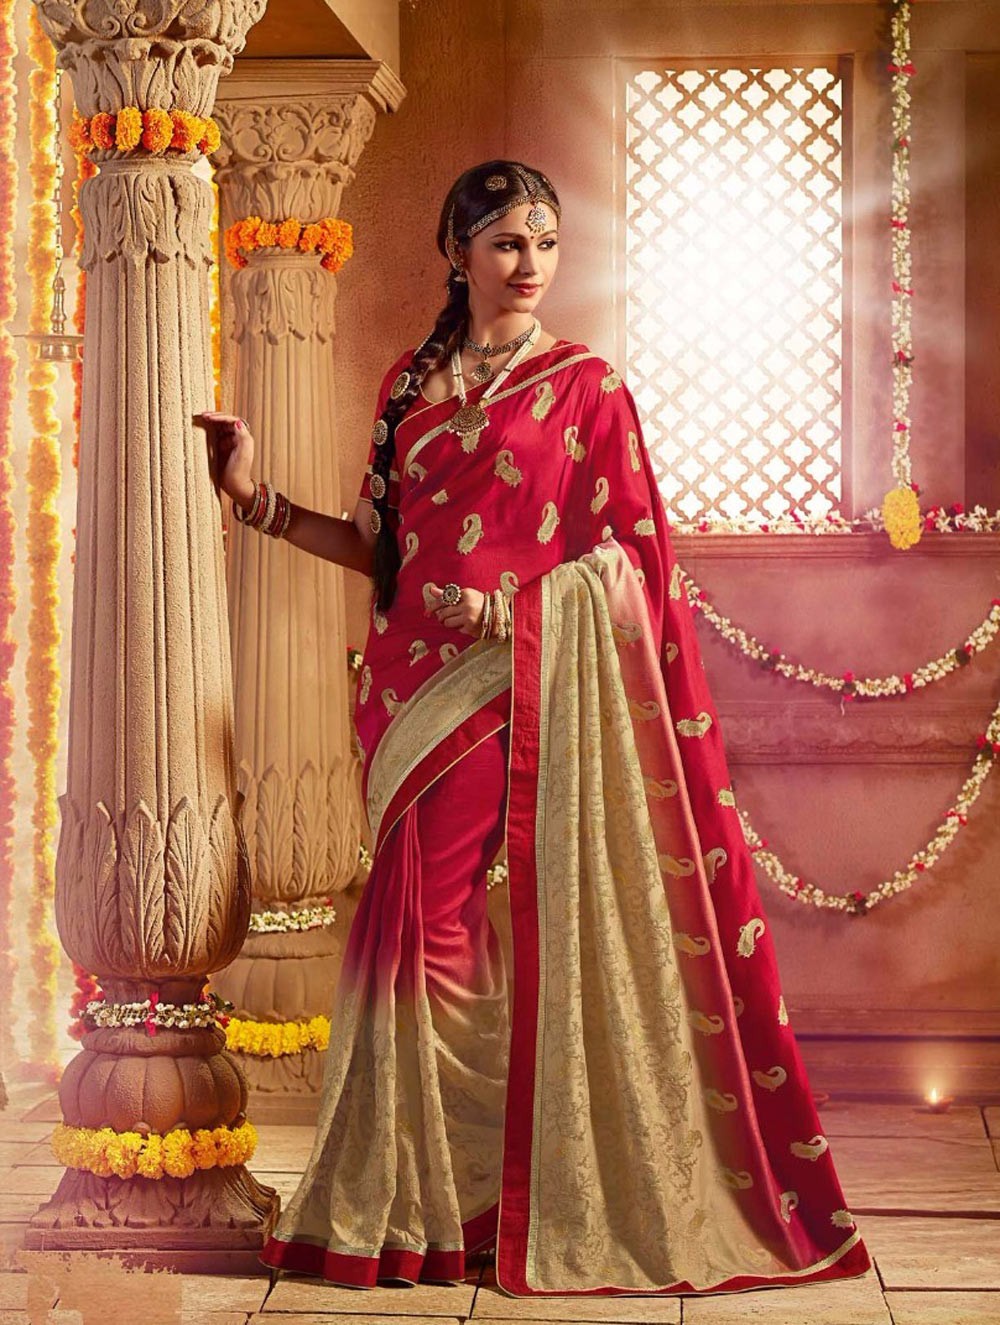 The model in South Indian designed silk saree.